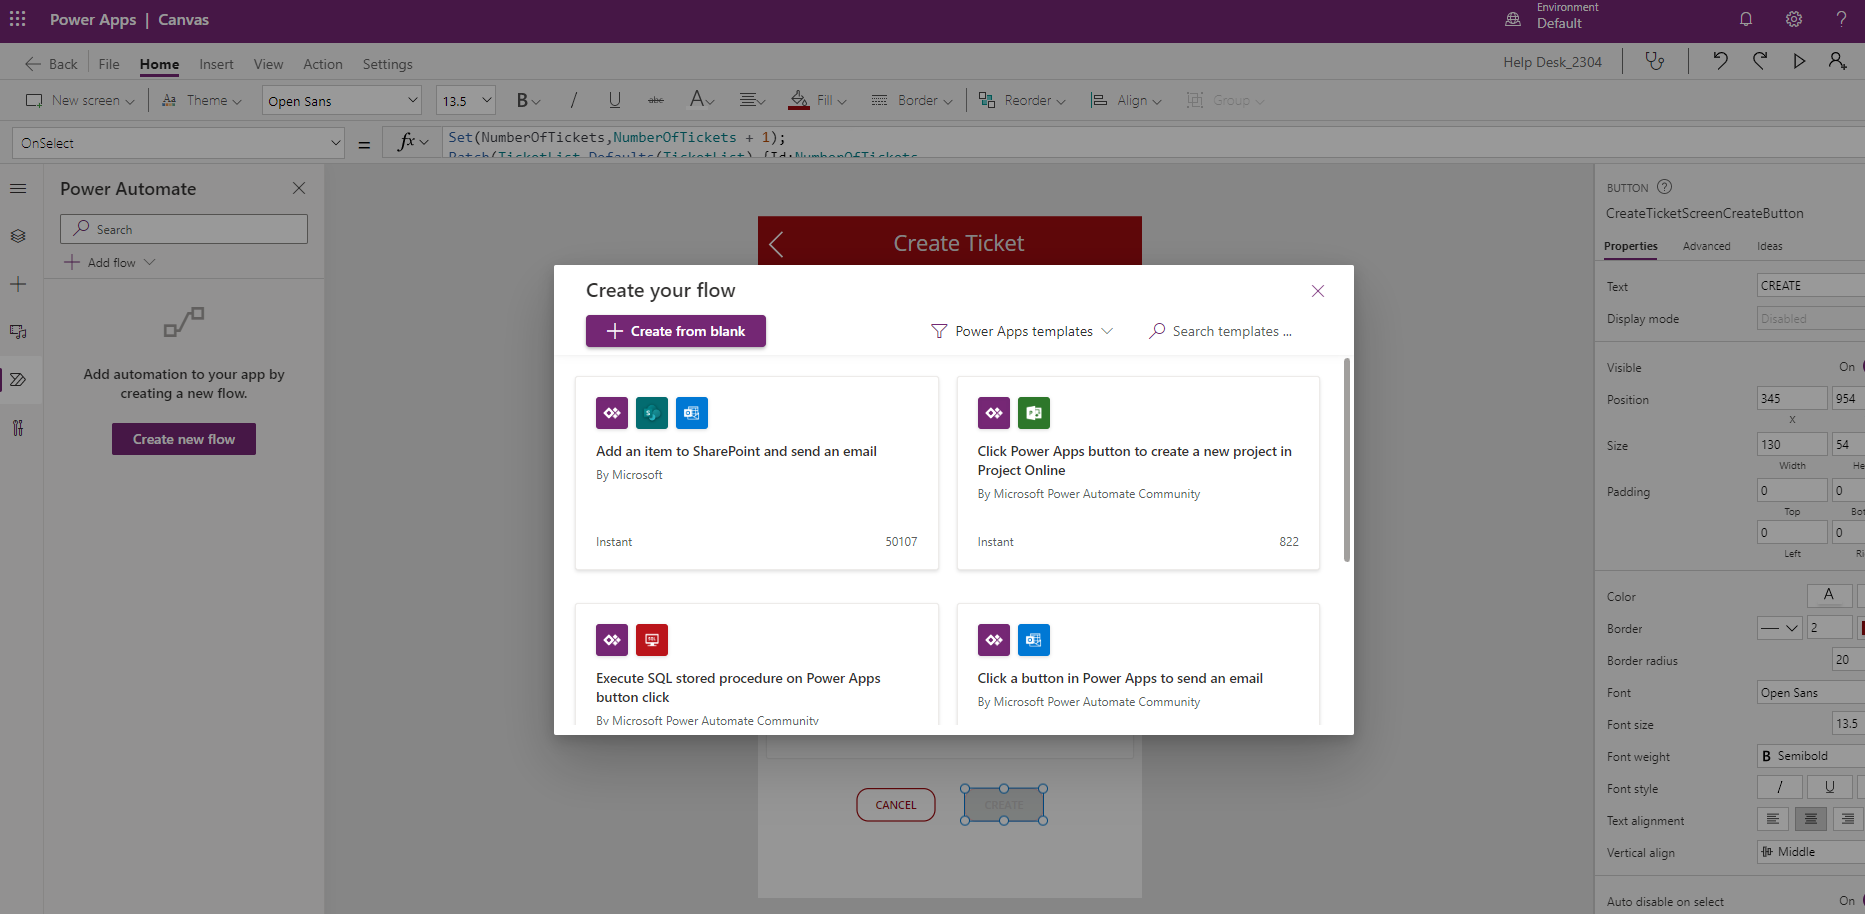 A screen capture of a Power Apps Canvas App in edit mode, showing the new Power Automate modal overlay featuring the ability to either create a new flow from blank or start from one of the provided Power Apps trigger templates.